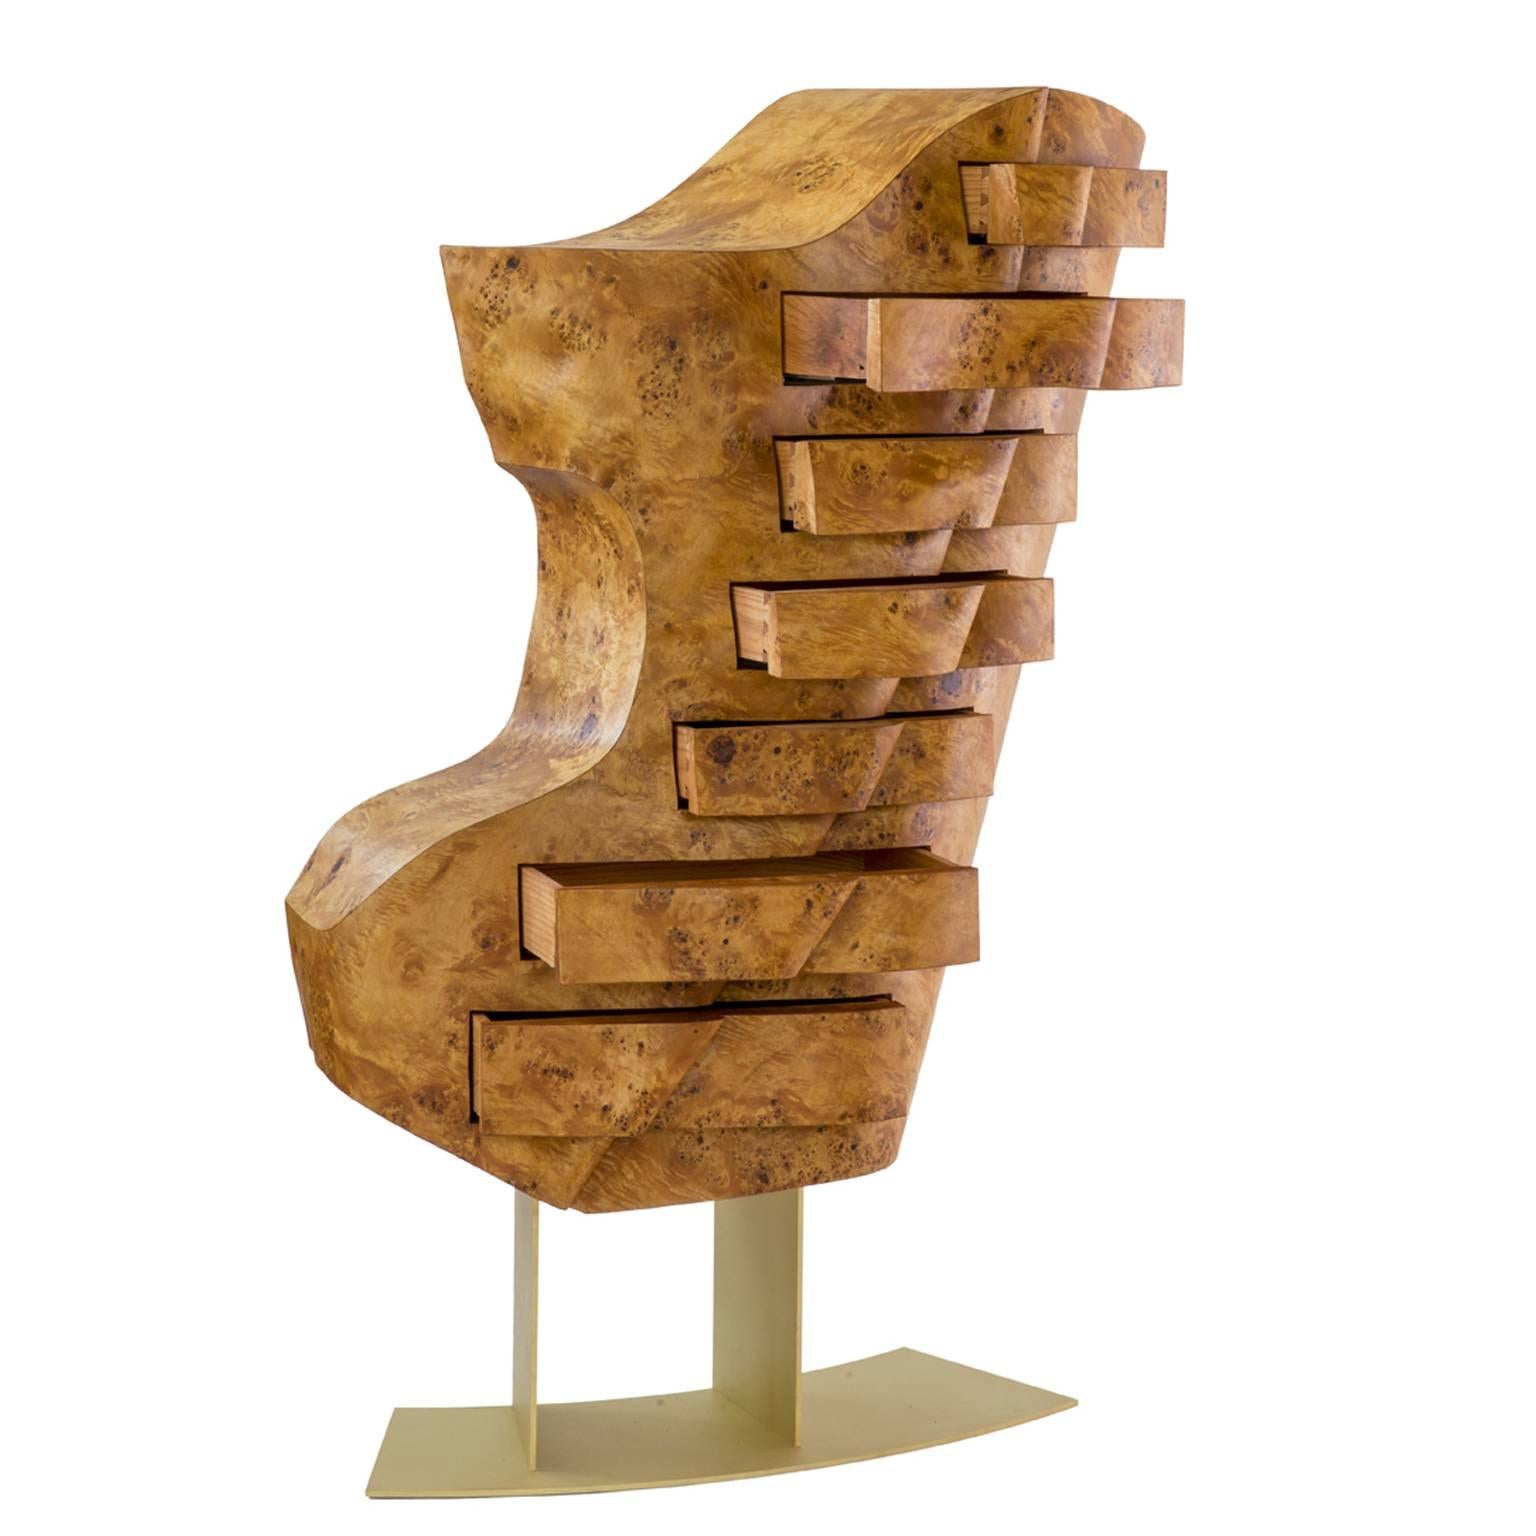 Settimio is a “settimino” chest of drawer (seven-drawer dresser) created with a clear allusion to sculpture, almost as a provocation, that follows the trand to mix art and design.
Poplar root wood and brass.
Limited edition 9+3 a.p.